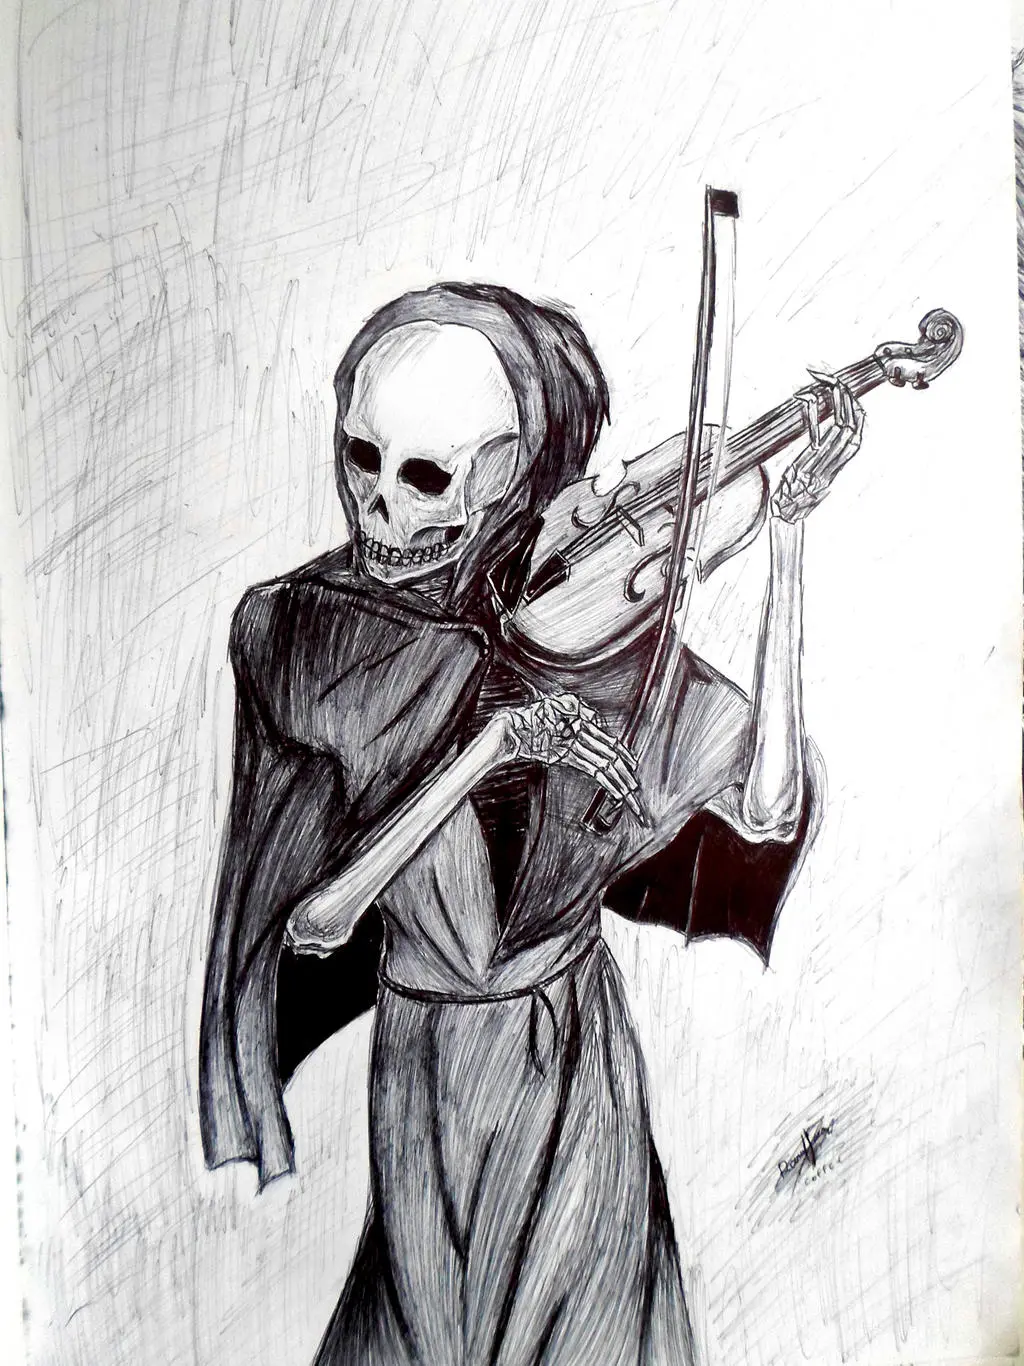 violin of death - What is the meaning of the self portrait with death playing the fiddle